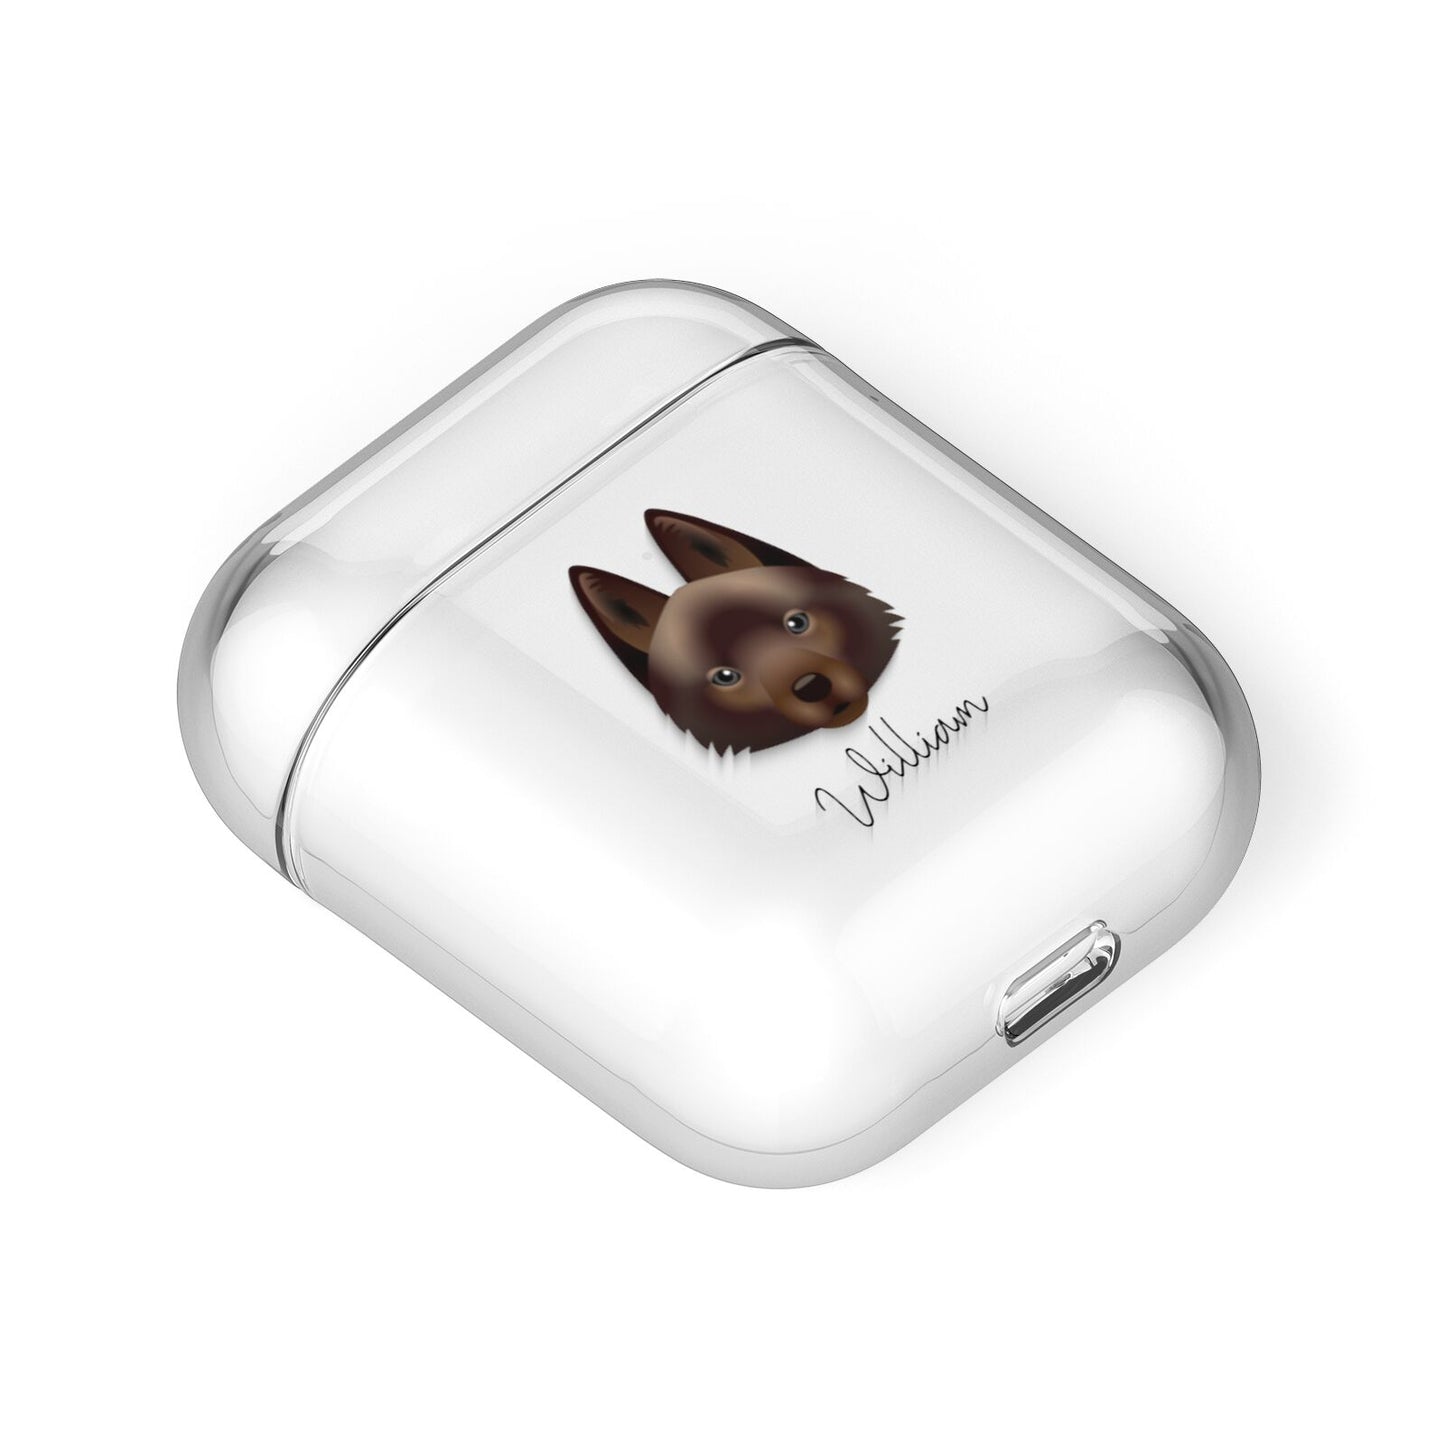 Schipperke Personalised AirPods Case Laid Flat